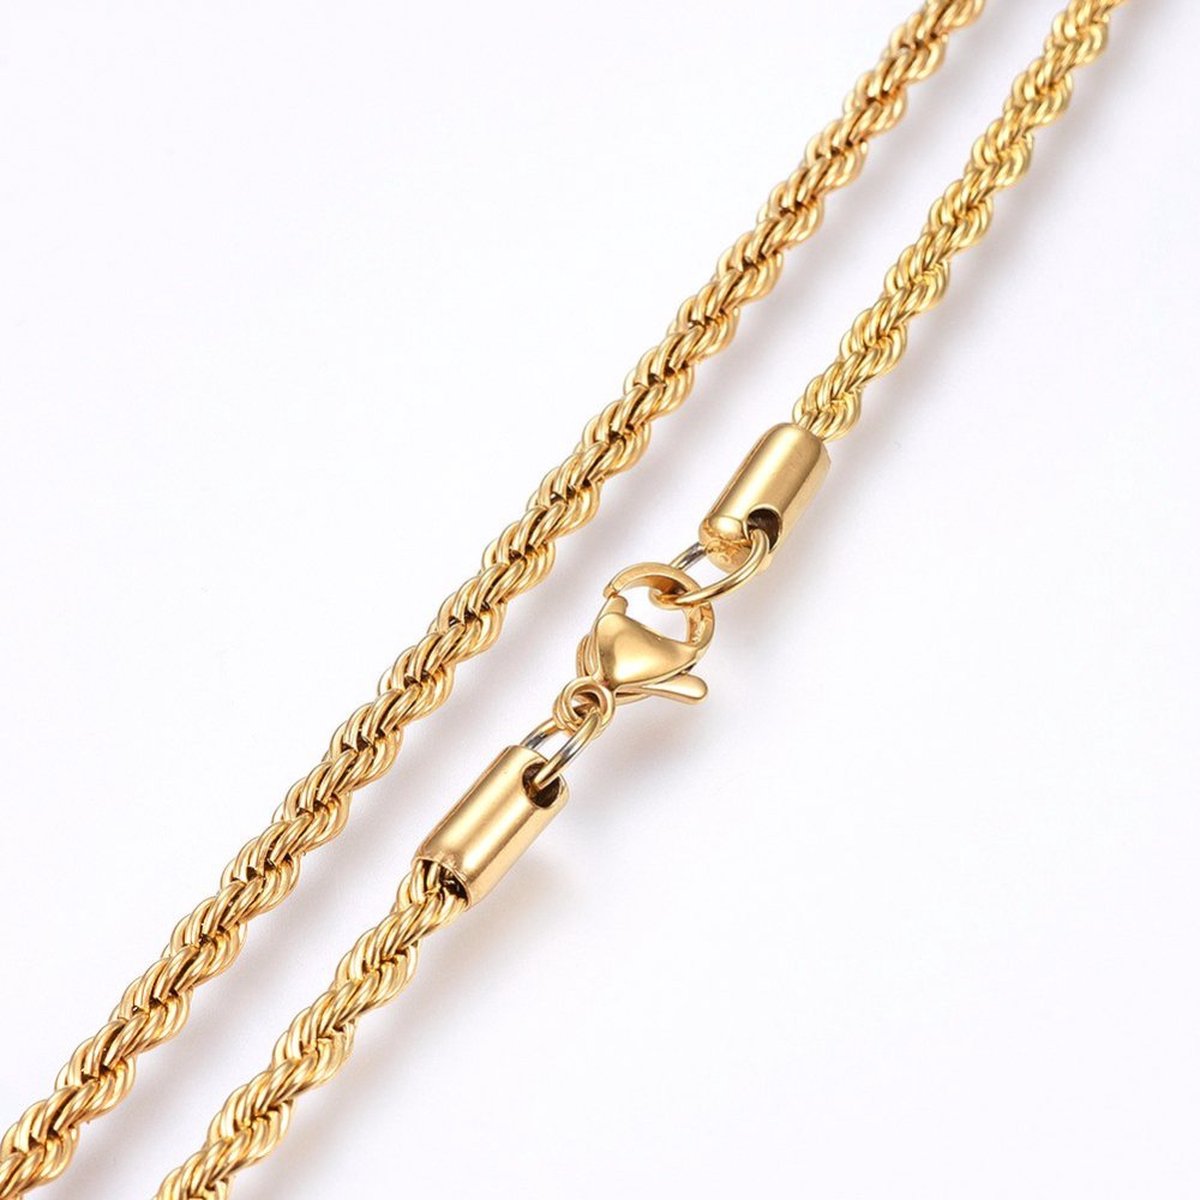 LunaLady ketting RVS, Stainless steel. 18 krt gold plated